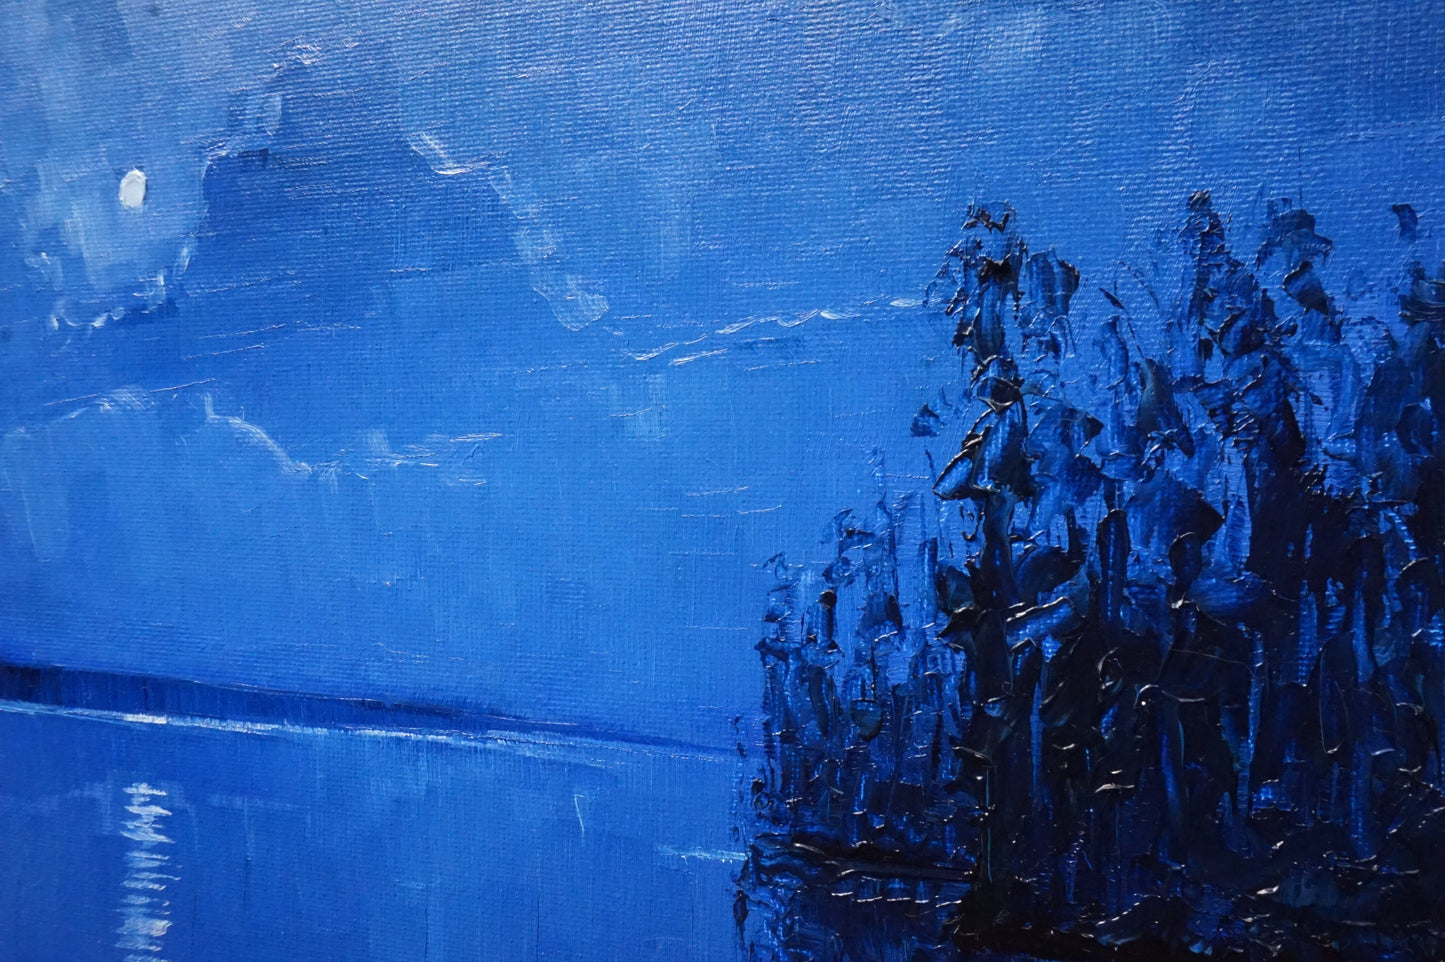 Once in a blue moon - 20x25.5cm / Oil painting on canvas panel